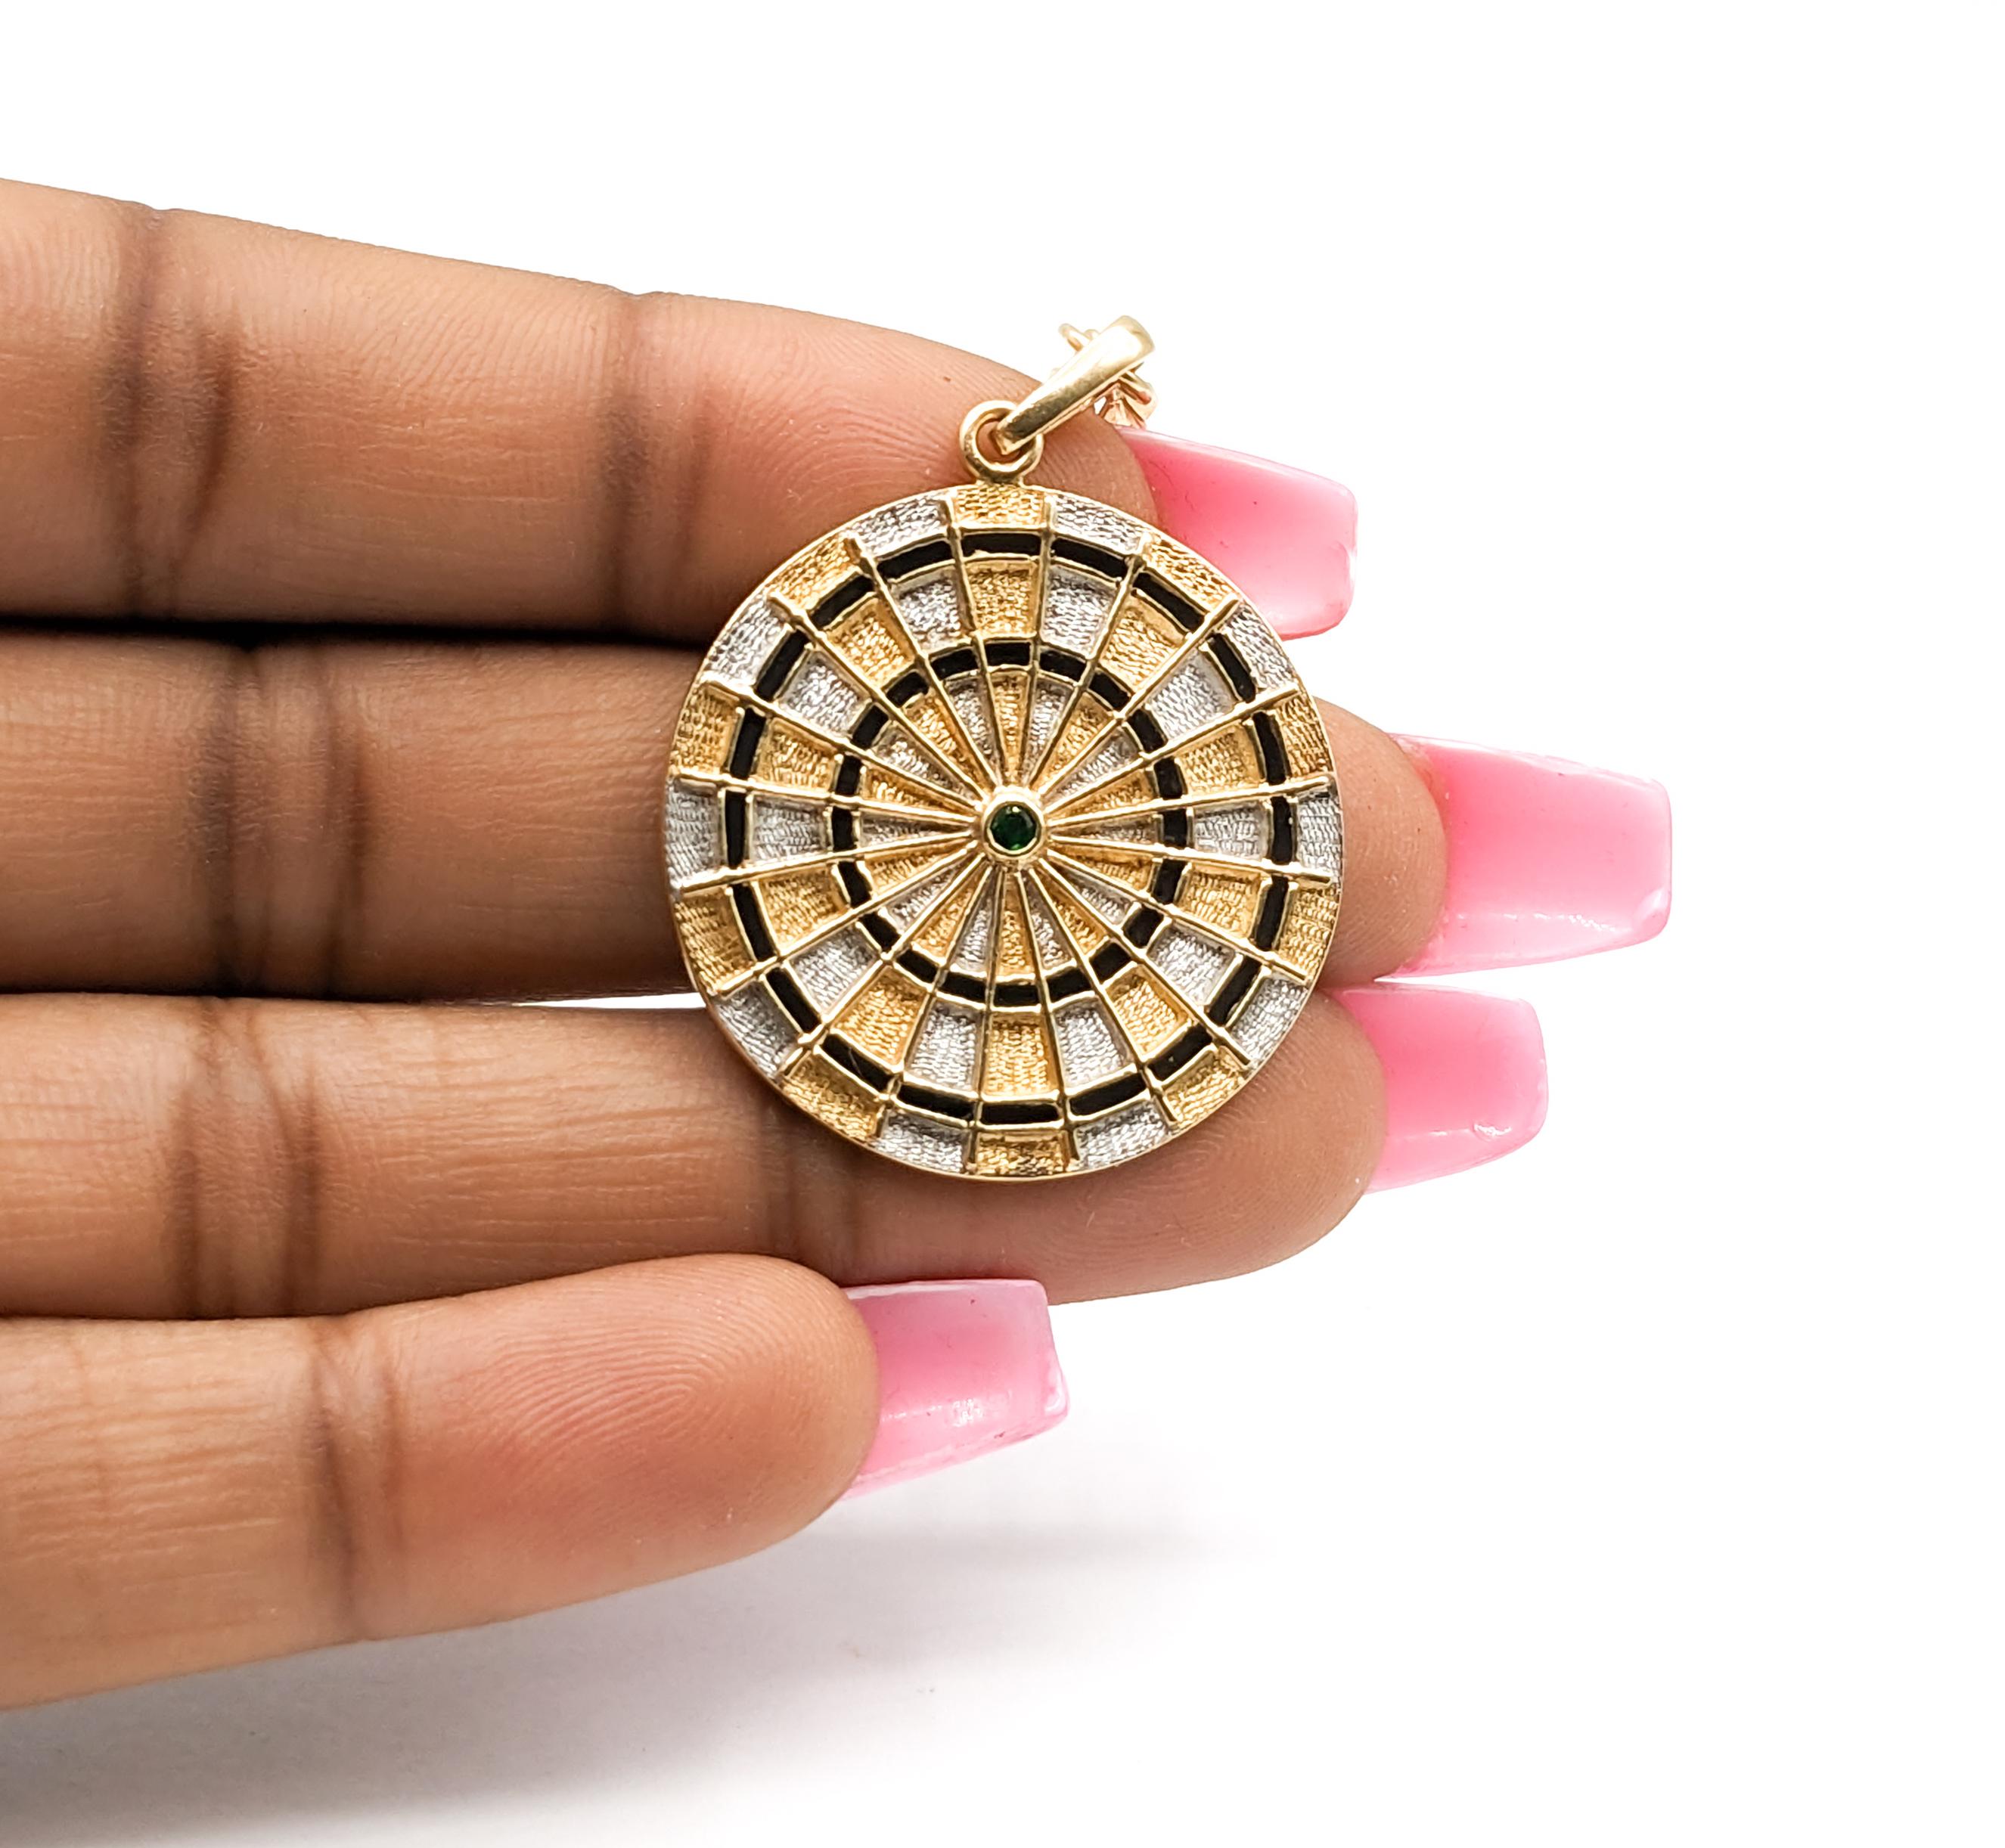 14K Gold, Emerald & Enamel Dartboard Pendant

This distinctive pendant, masterfully crafted in a blend of 14kt white and yellow gold, showcases a captivating round-cut emerald at its core, set against a striking enamel 